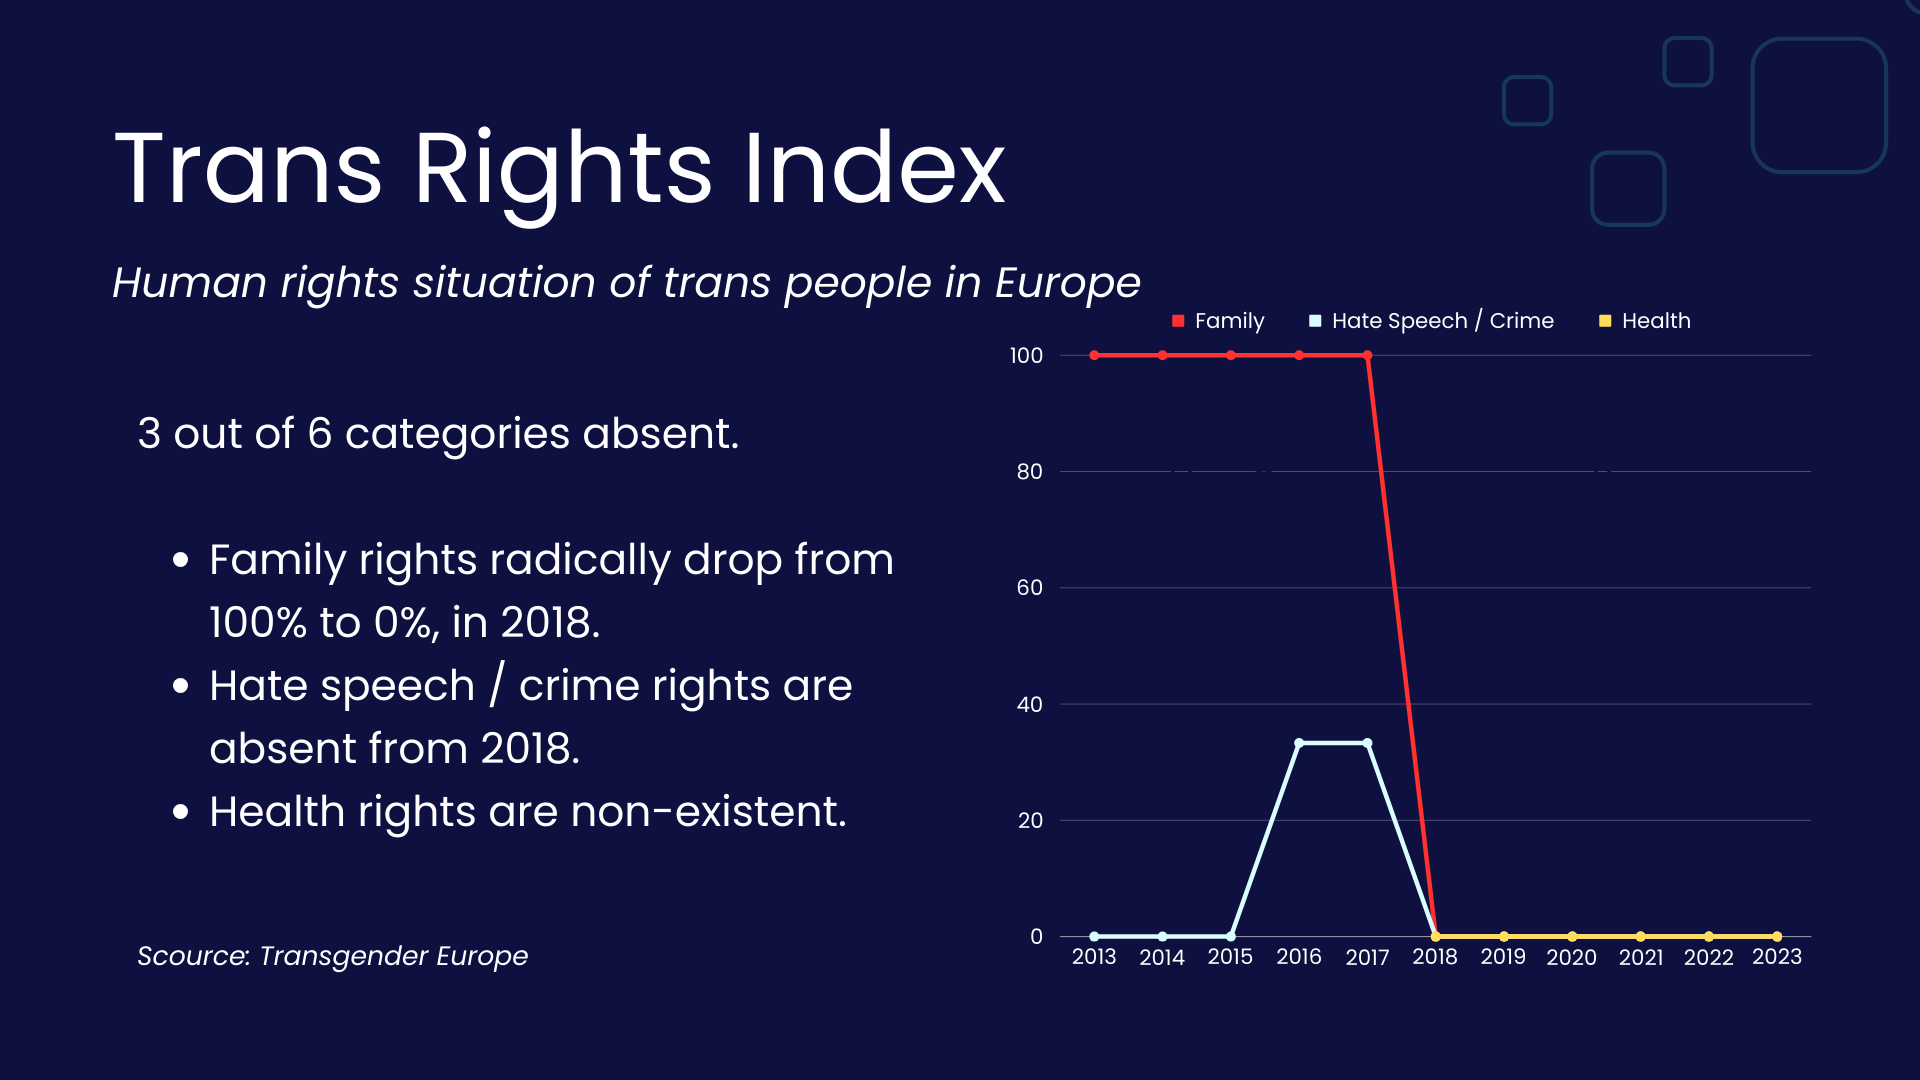 Trans rights index: Human rights situation of trans people in Europe. 3 out of 6 categories absent: Family rights radically drop from 100% to 0%, in 2018. Hate speech / crime rights are absent from 2018. Health rights are non-existent. (Source: Transgender Europe)